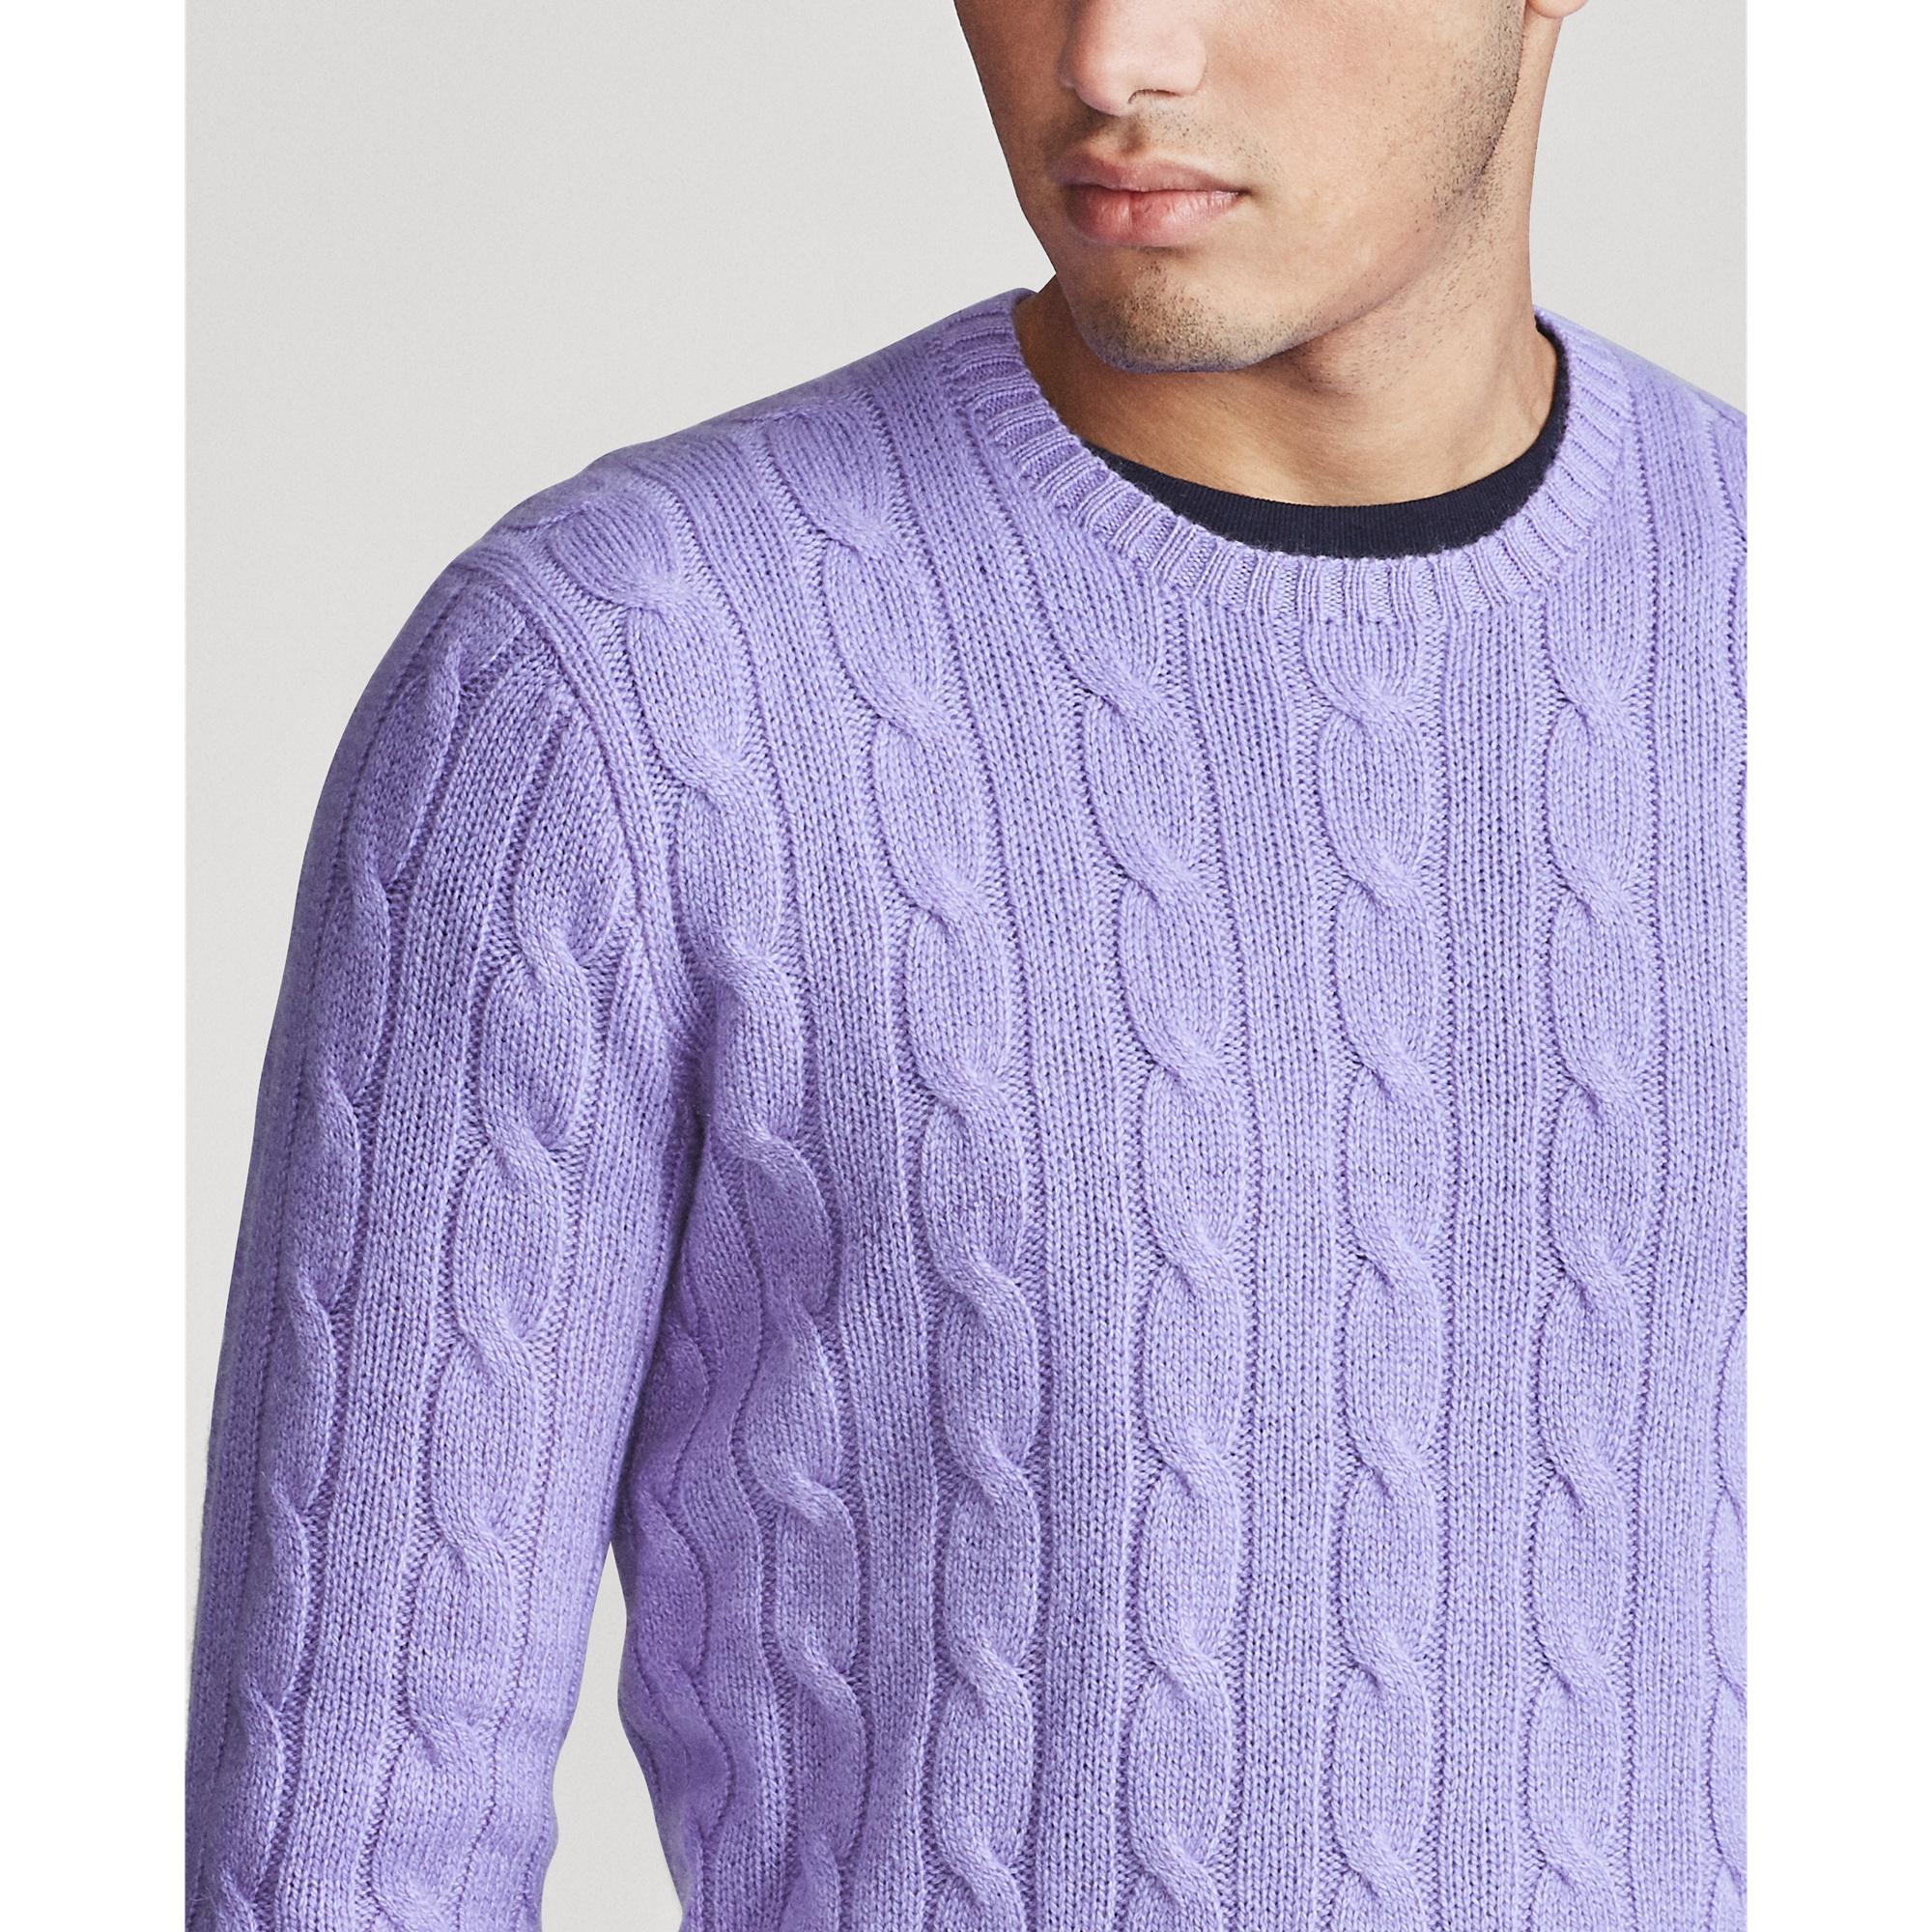 Polo Ralph Lauren Cable-knit Cashmere Sweater in Purple for Men - Lyst